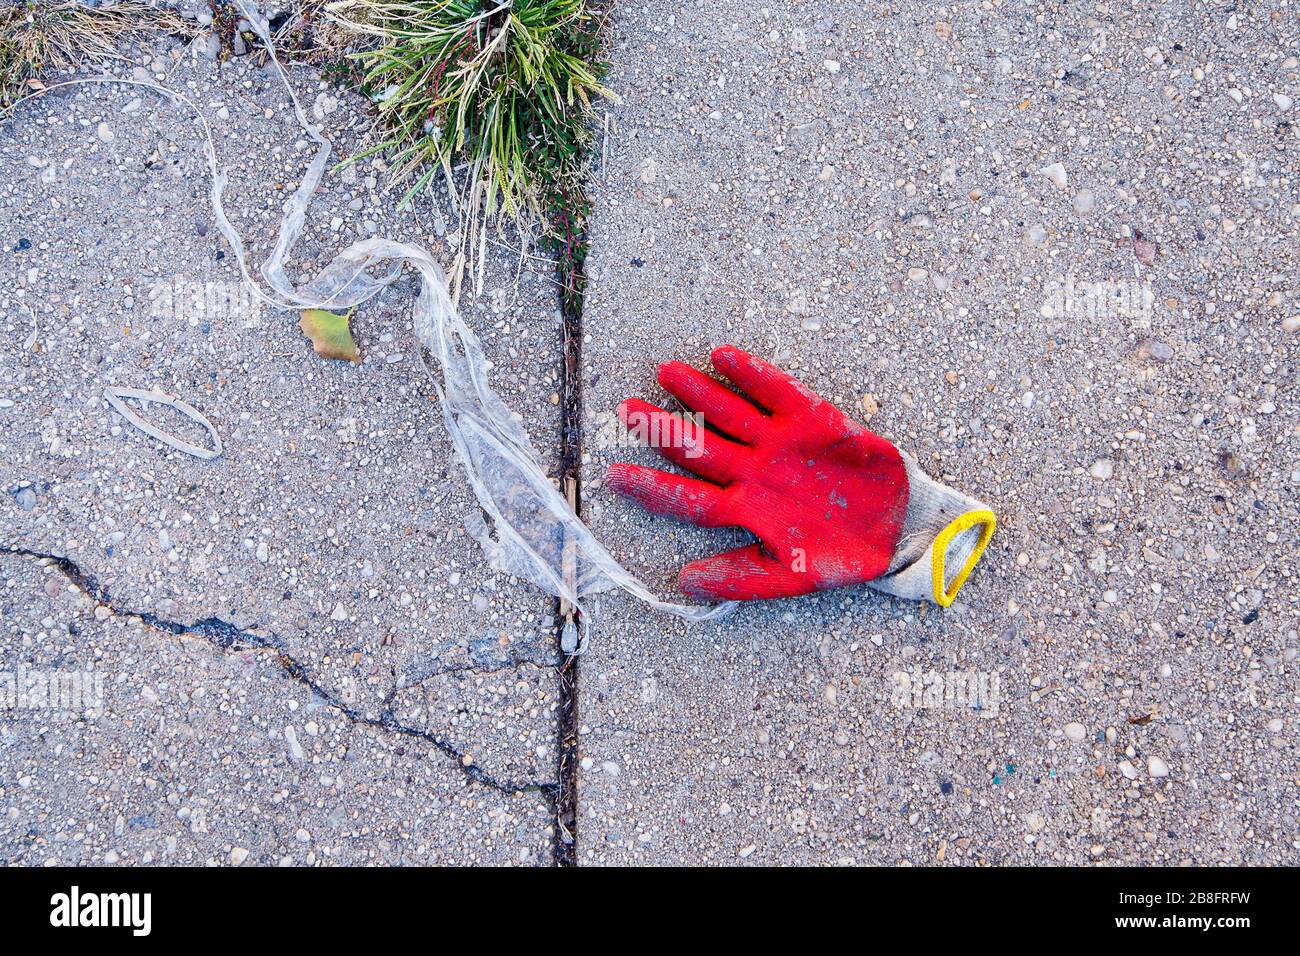 Lone red work glove on sidewalk with debris and weeds Stock Photo